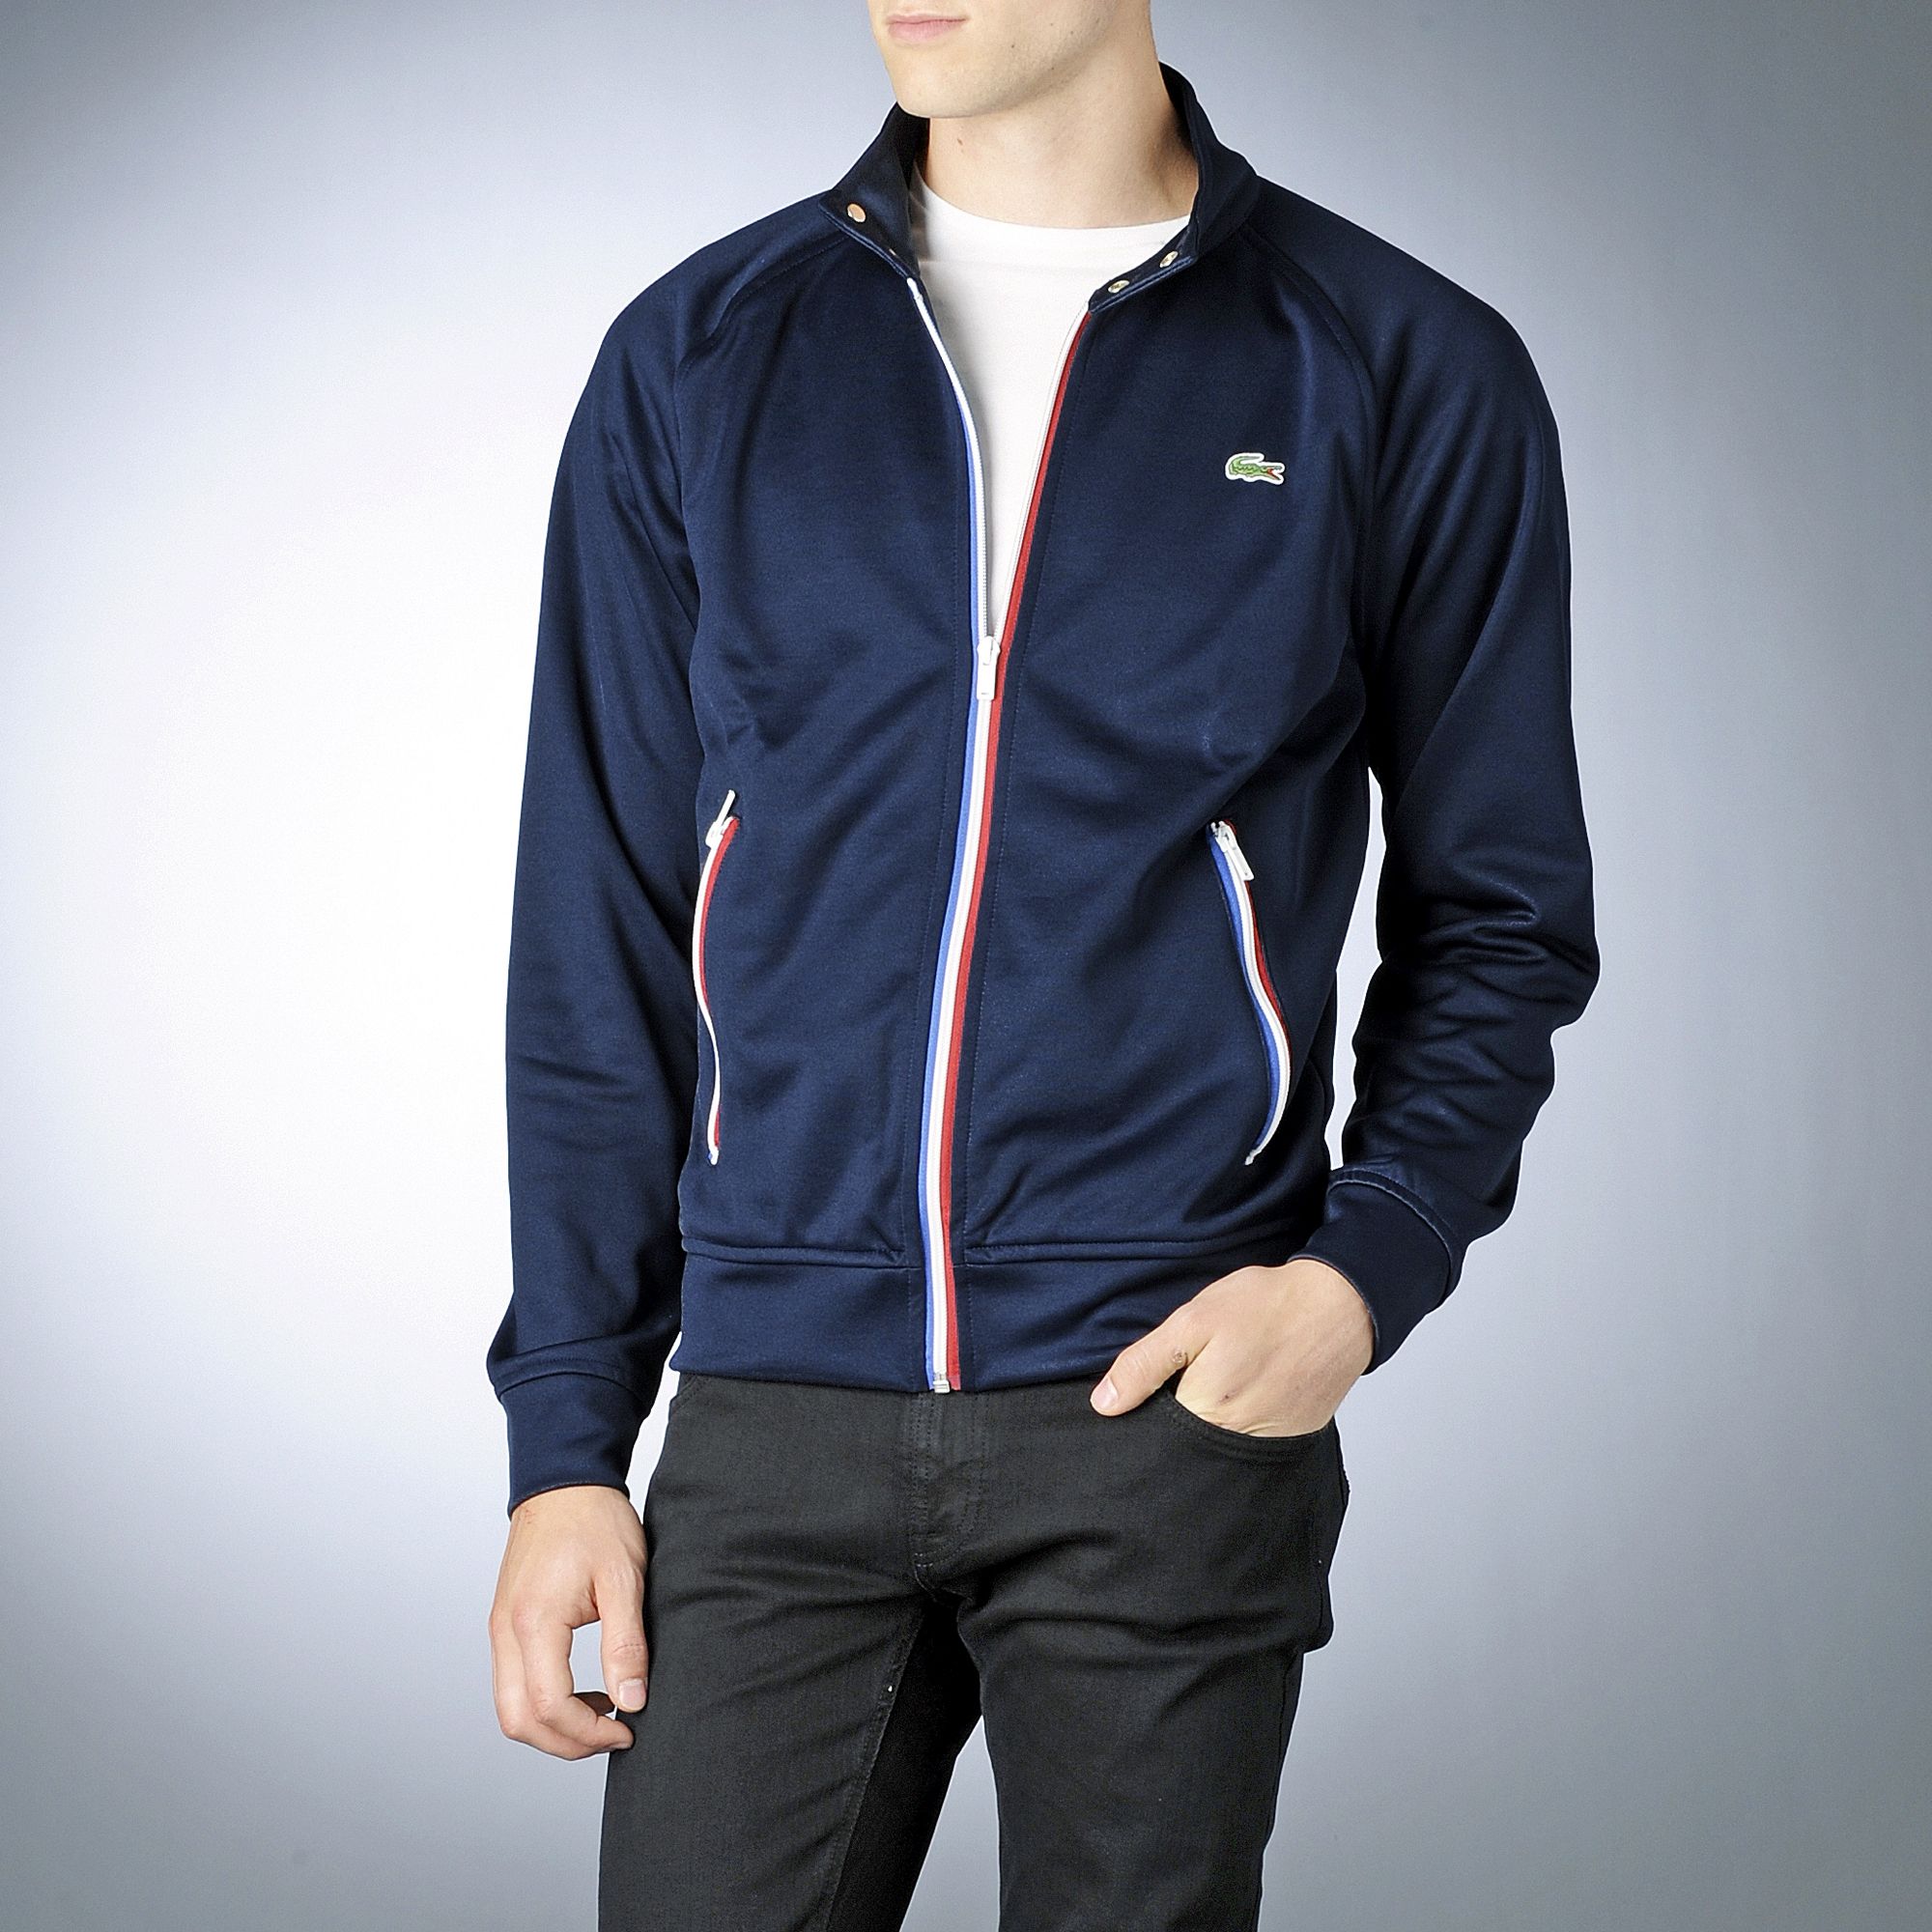 Lacoste Track Jacket in Navy (Blue) for Men - Lyst